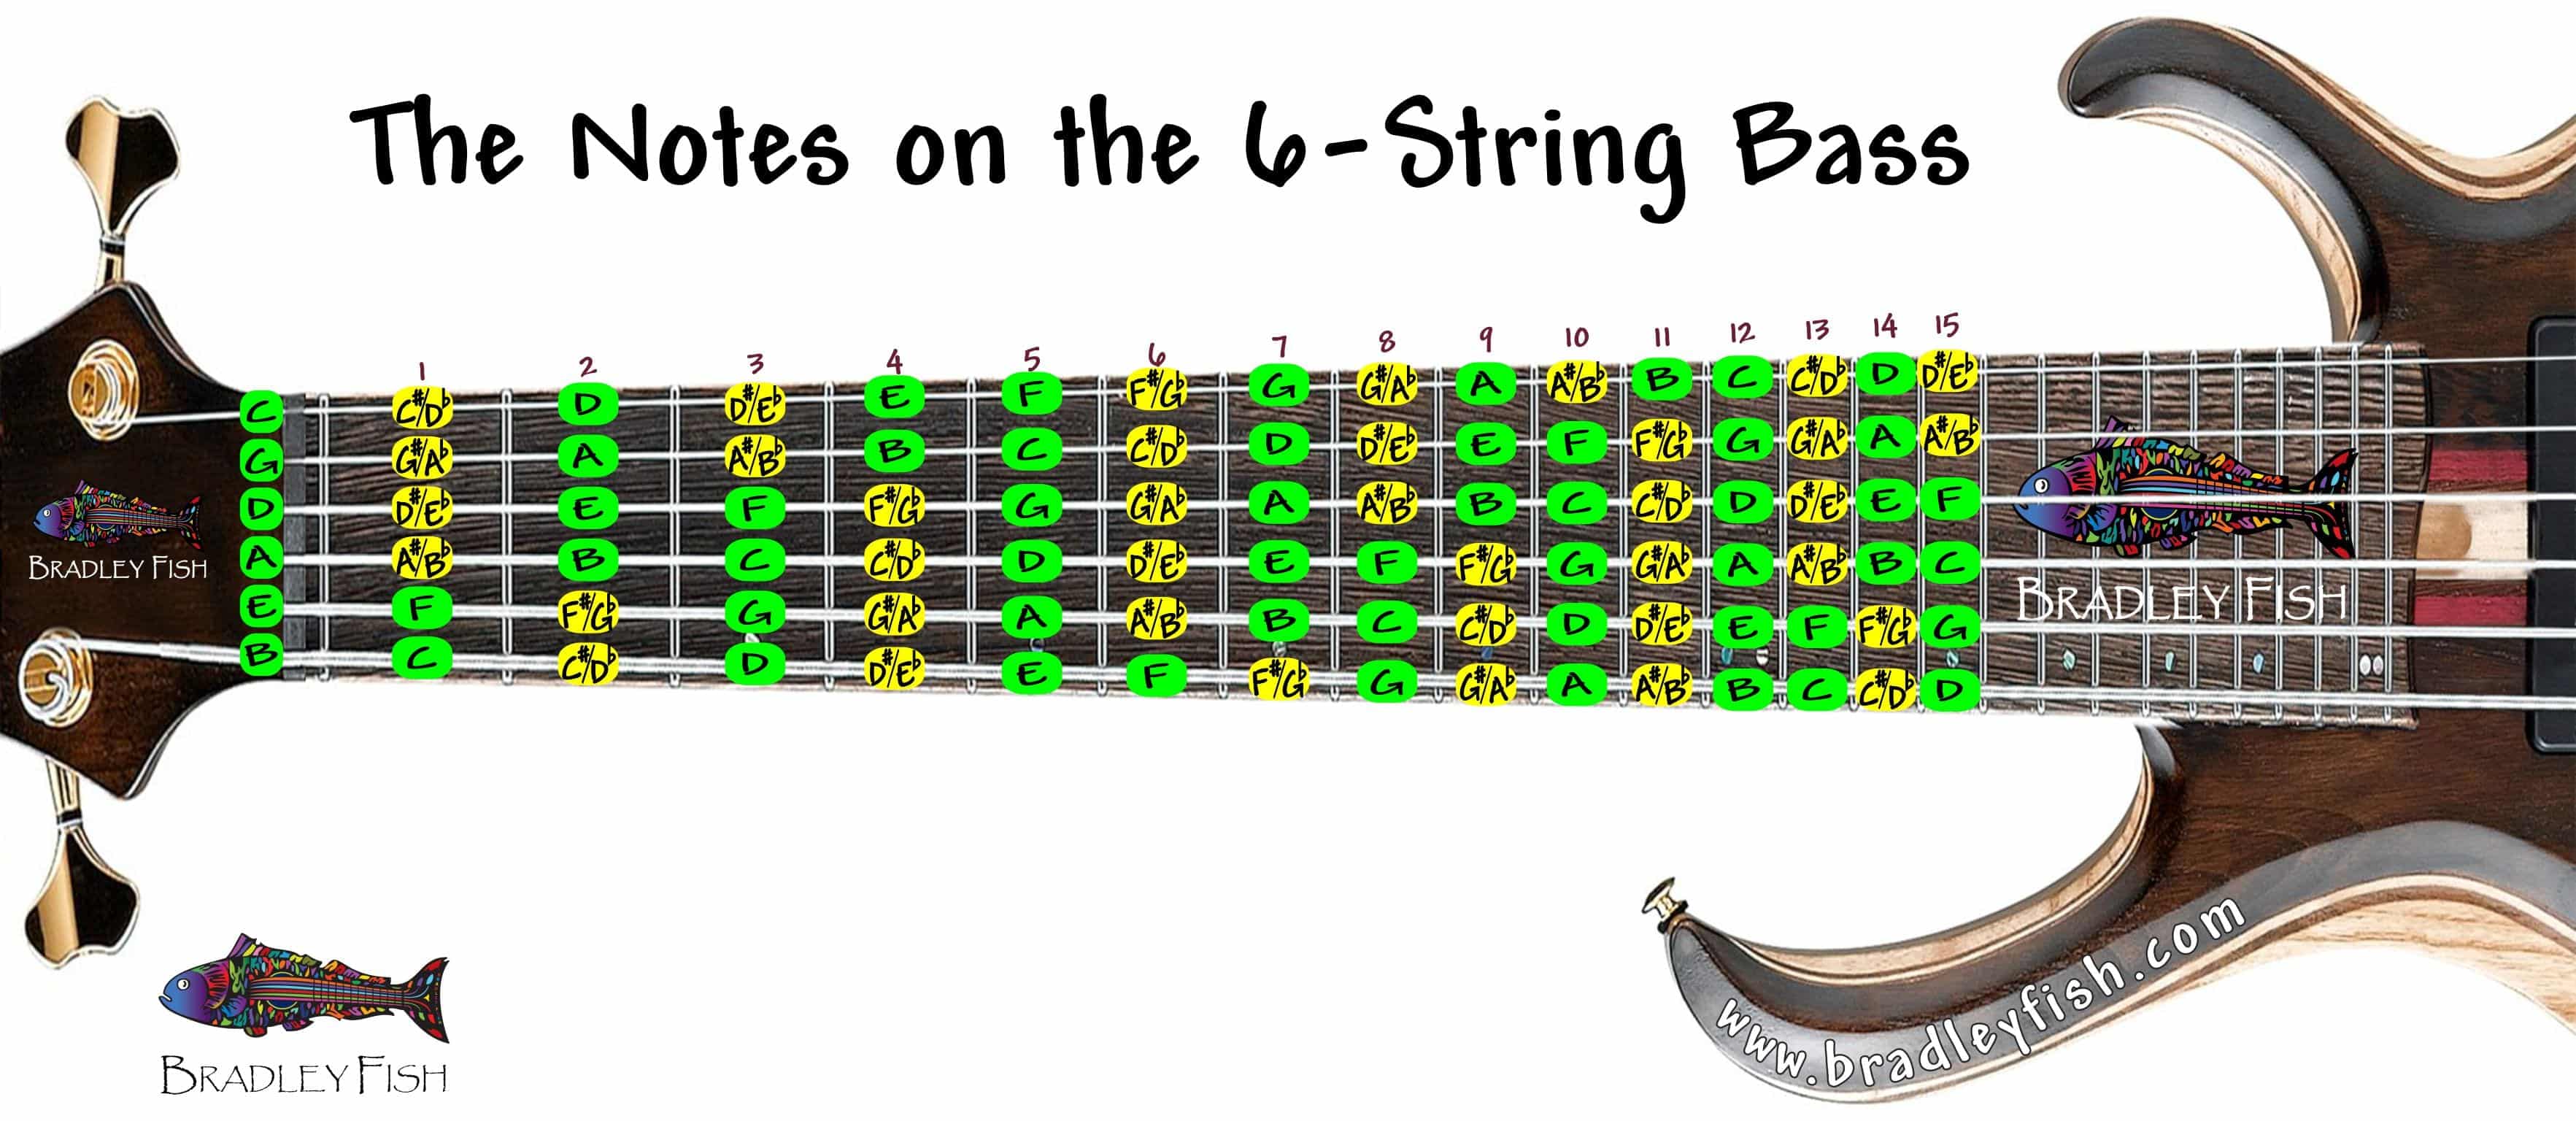 the-notes-on-the-6-string-bass-guitar-bradley-fish-images-and-photos